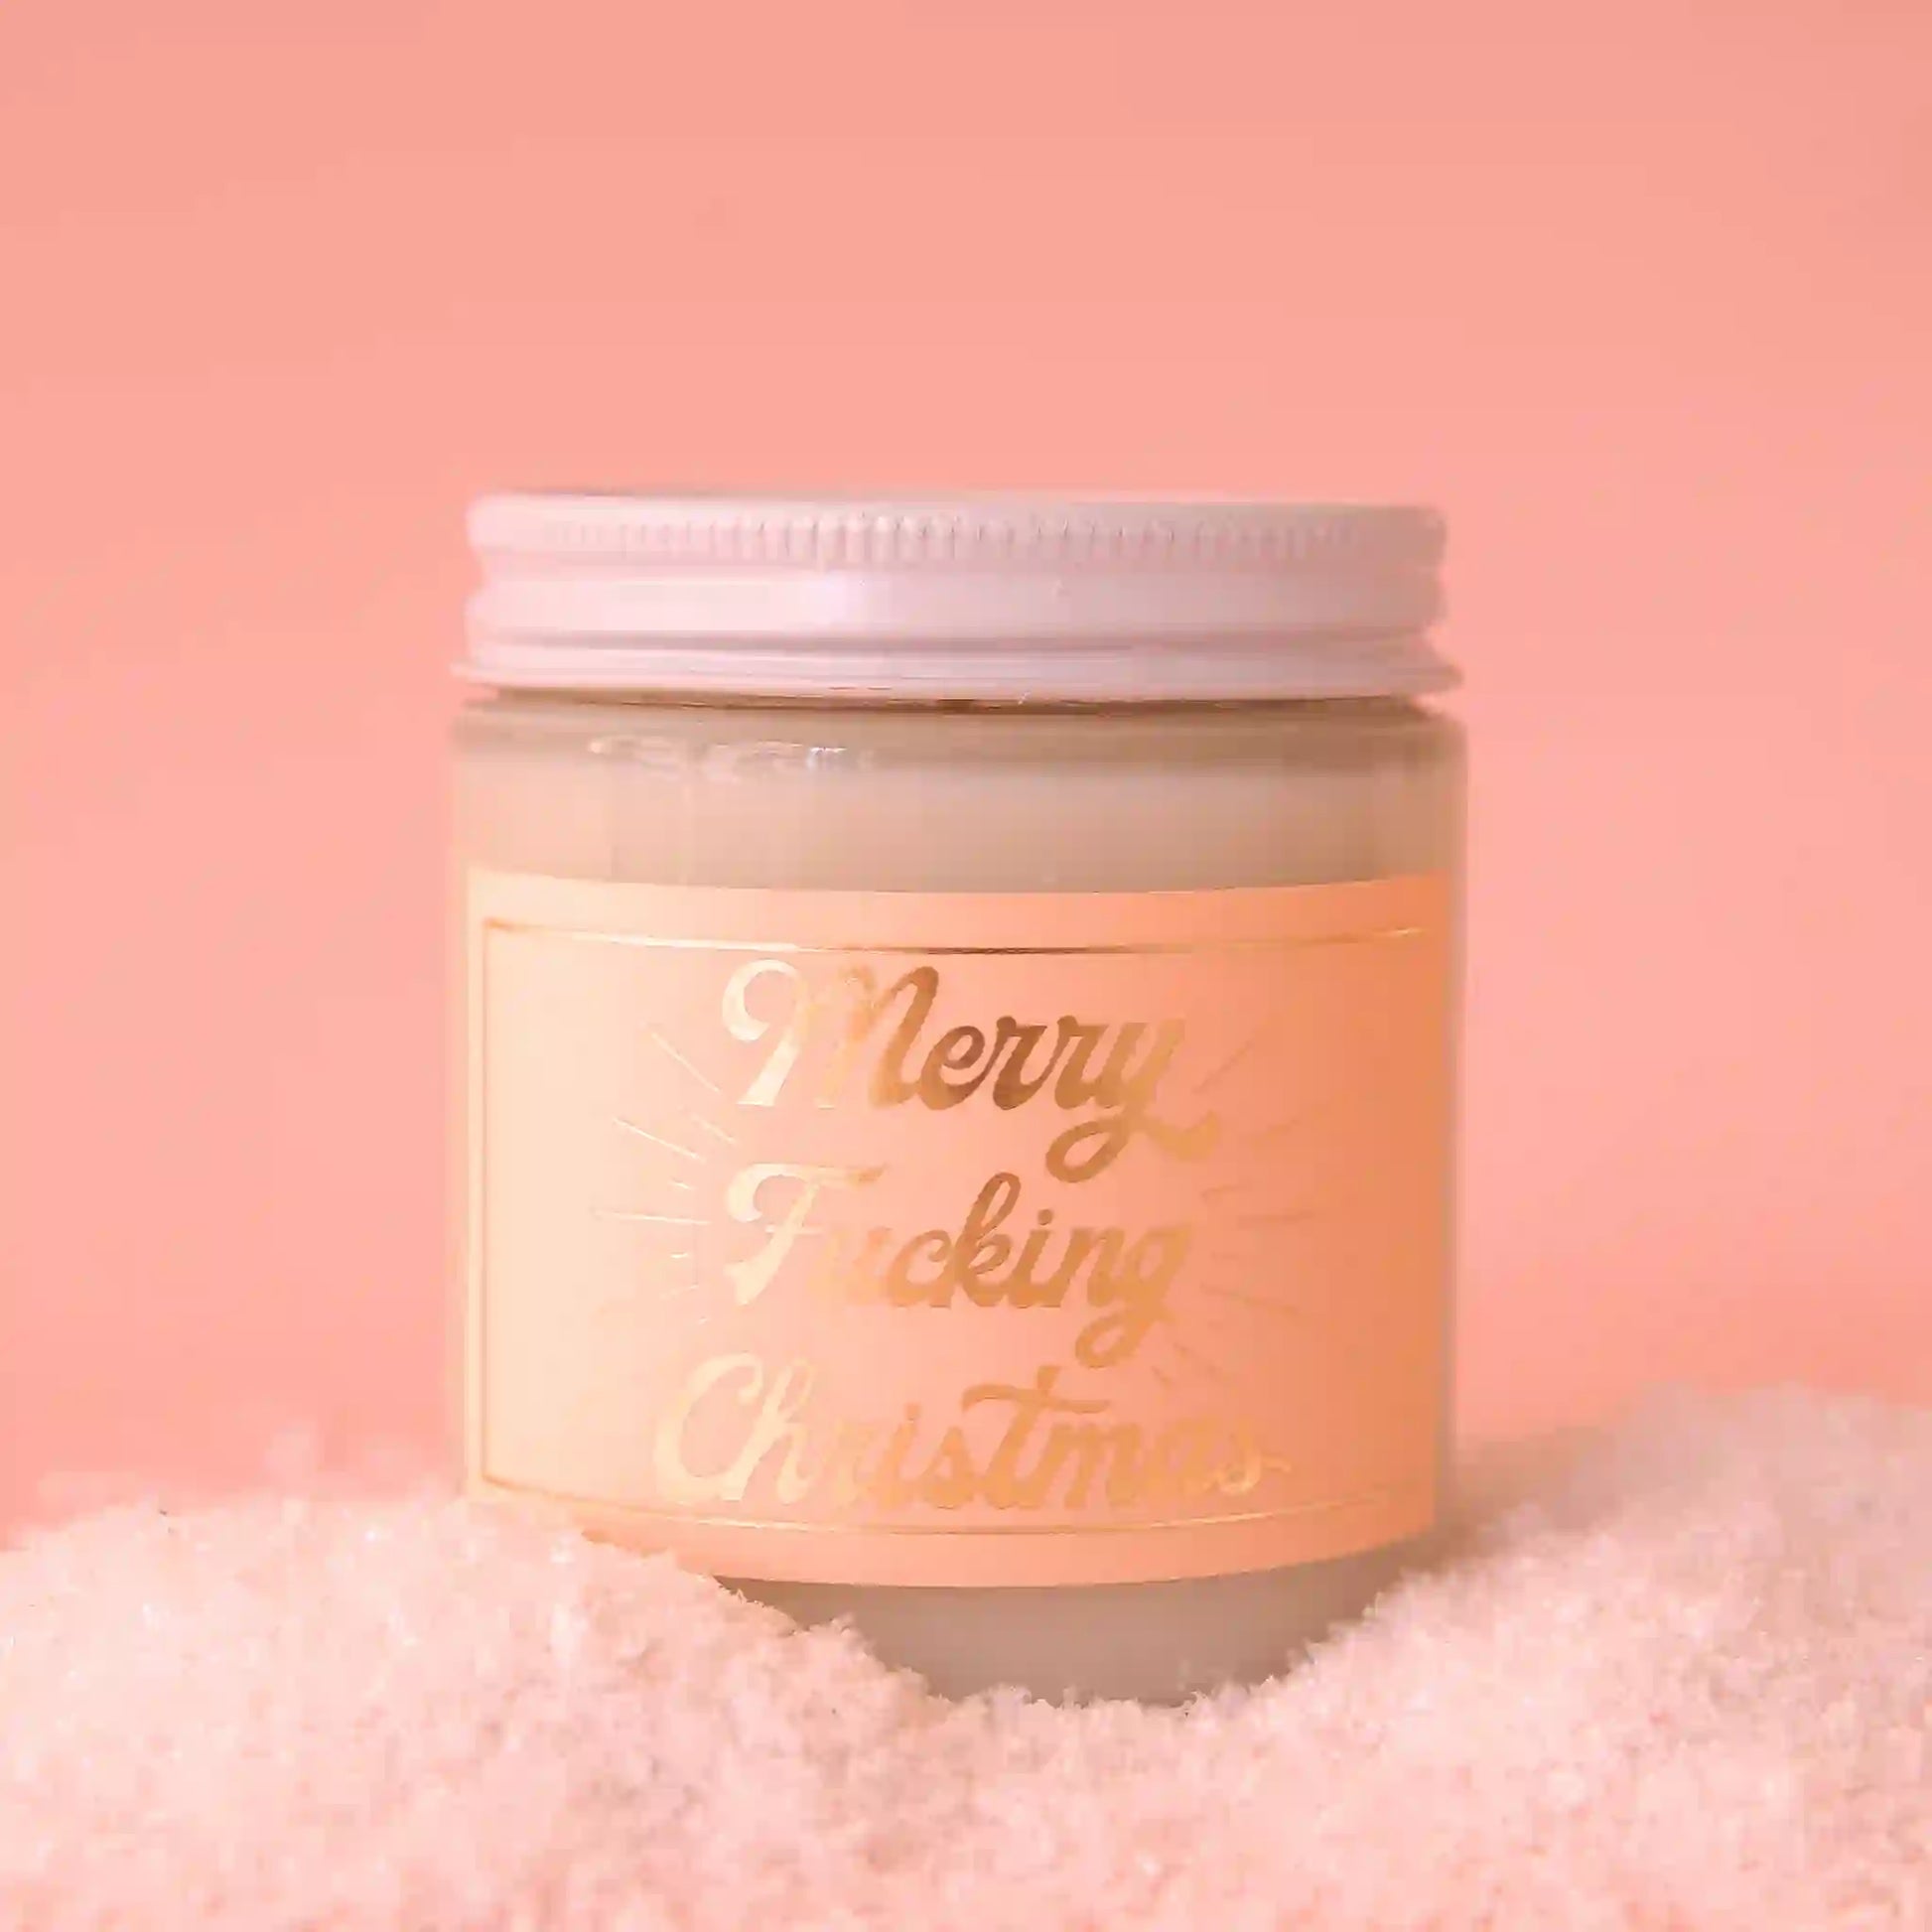 On a pink background is a clear glass jarred candle with a white lid and a peachy label that has gold text reading, "Merry Fucking Christmas".